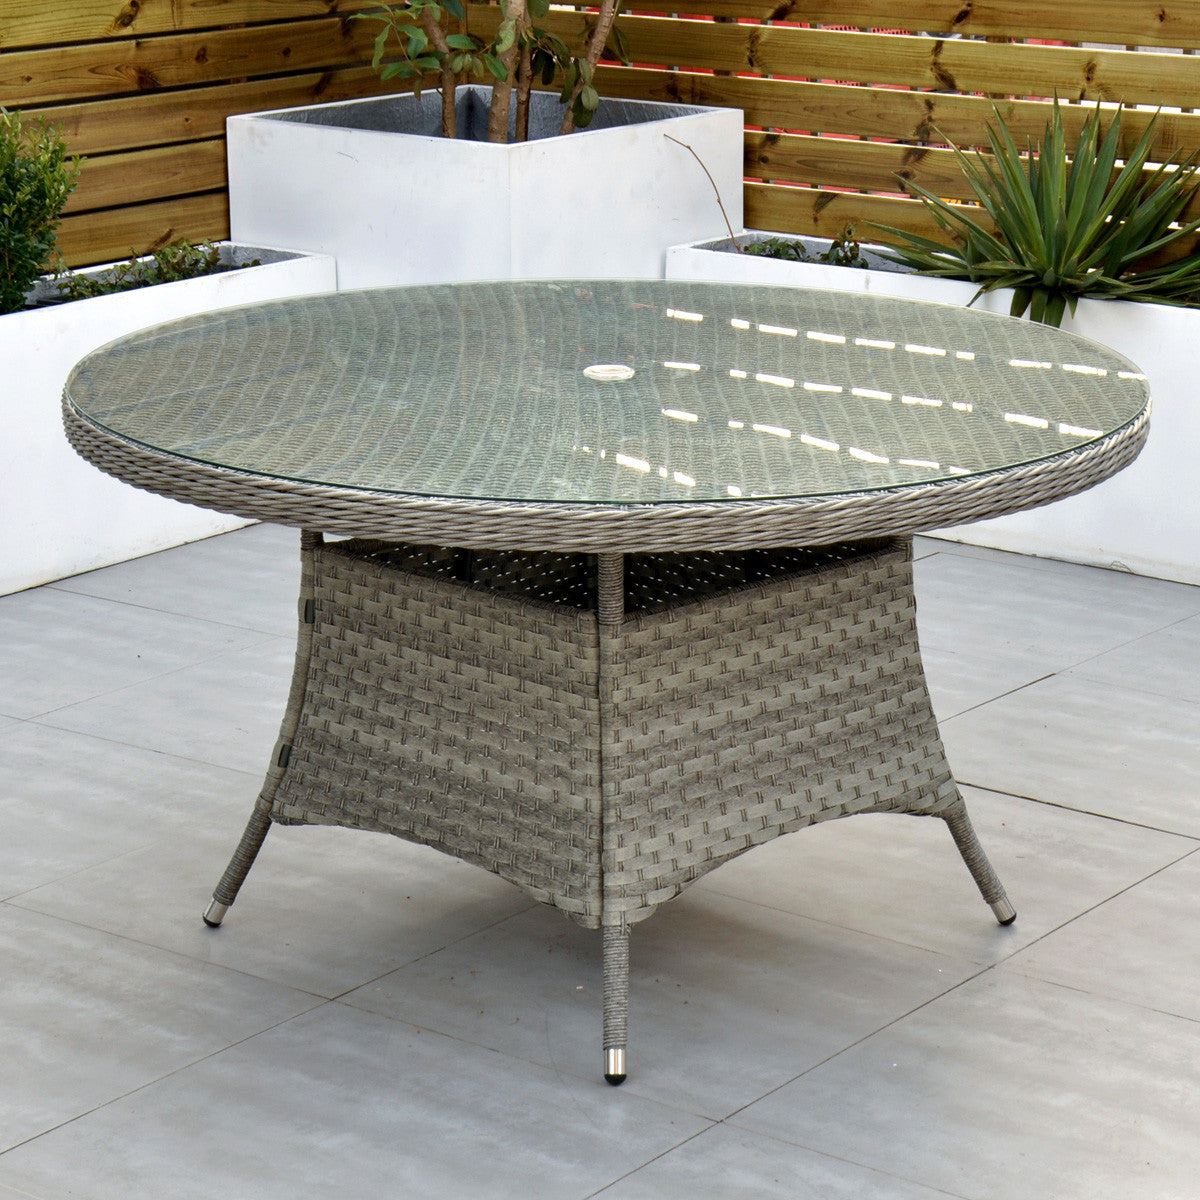 Bali - 6 Seat Set with 135cm Round Table (Grey)